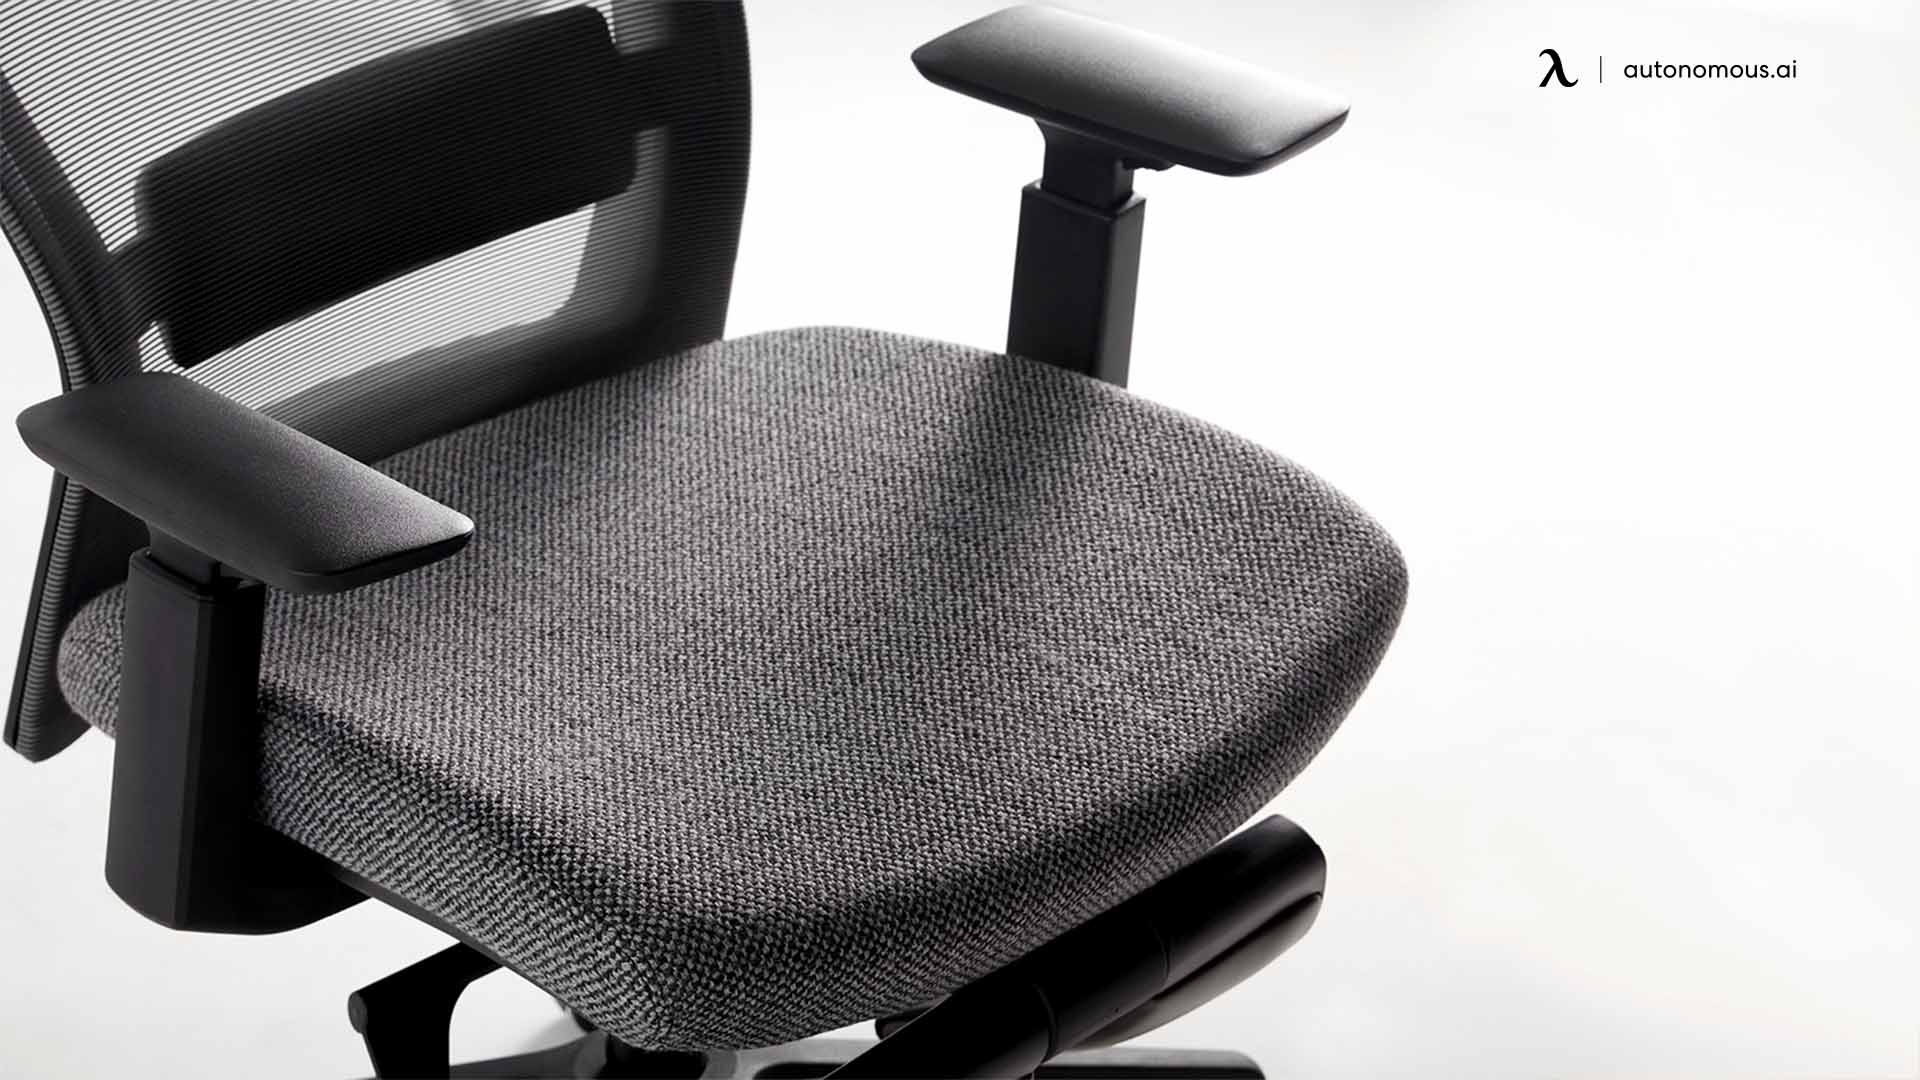 Seat material of comfortable chair for long sitting